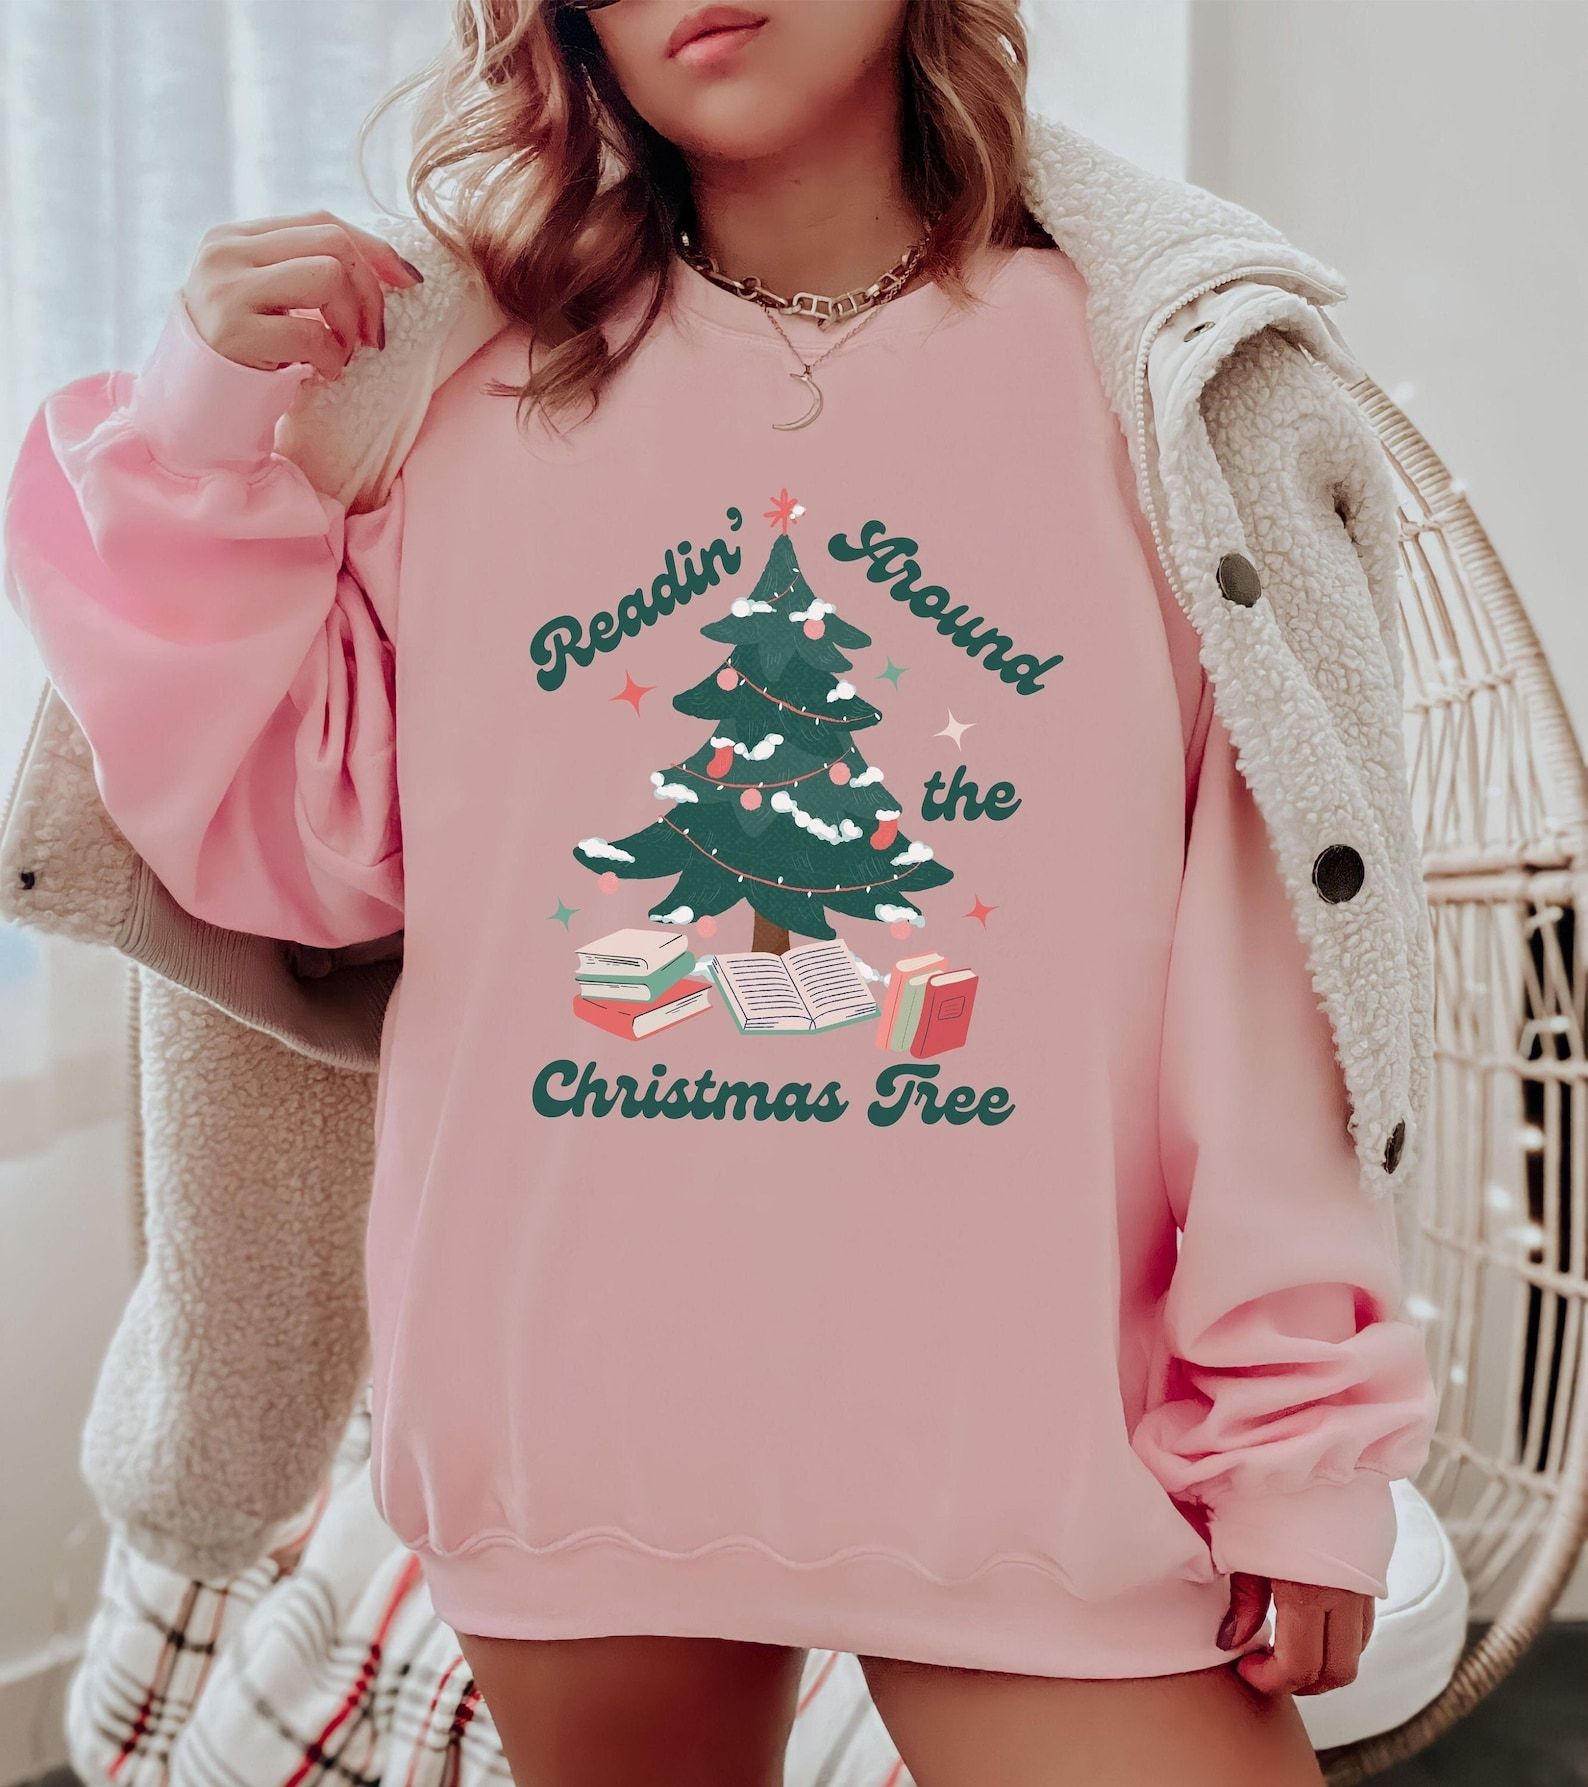 A pink sweatshirt with a decorated Christmas tree, books beneath it, and the words "Readin' around the Christmas tree"